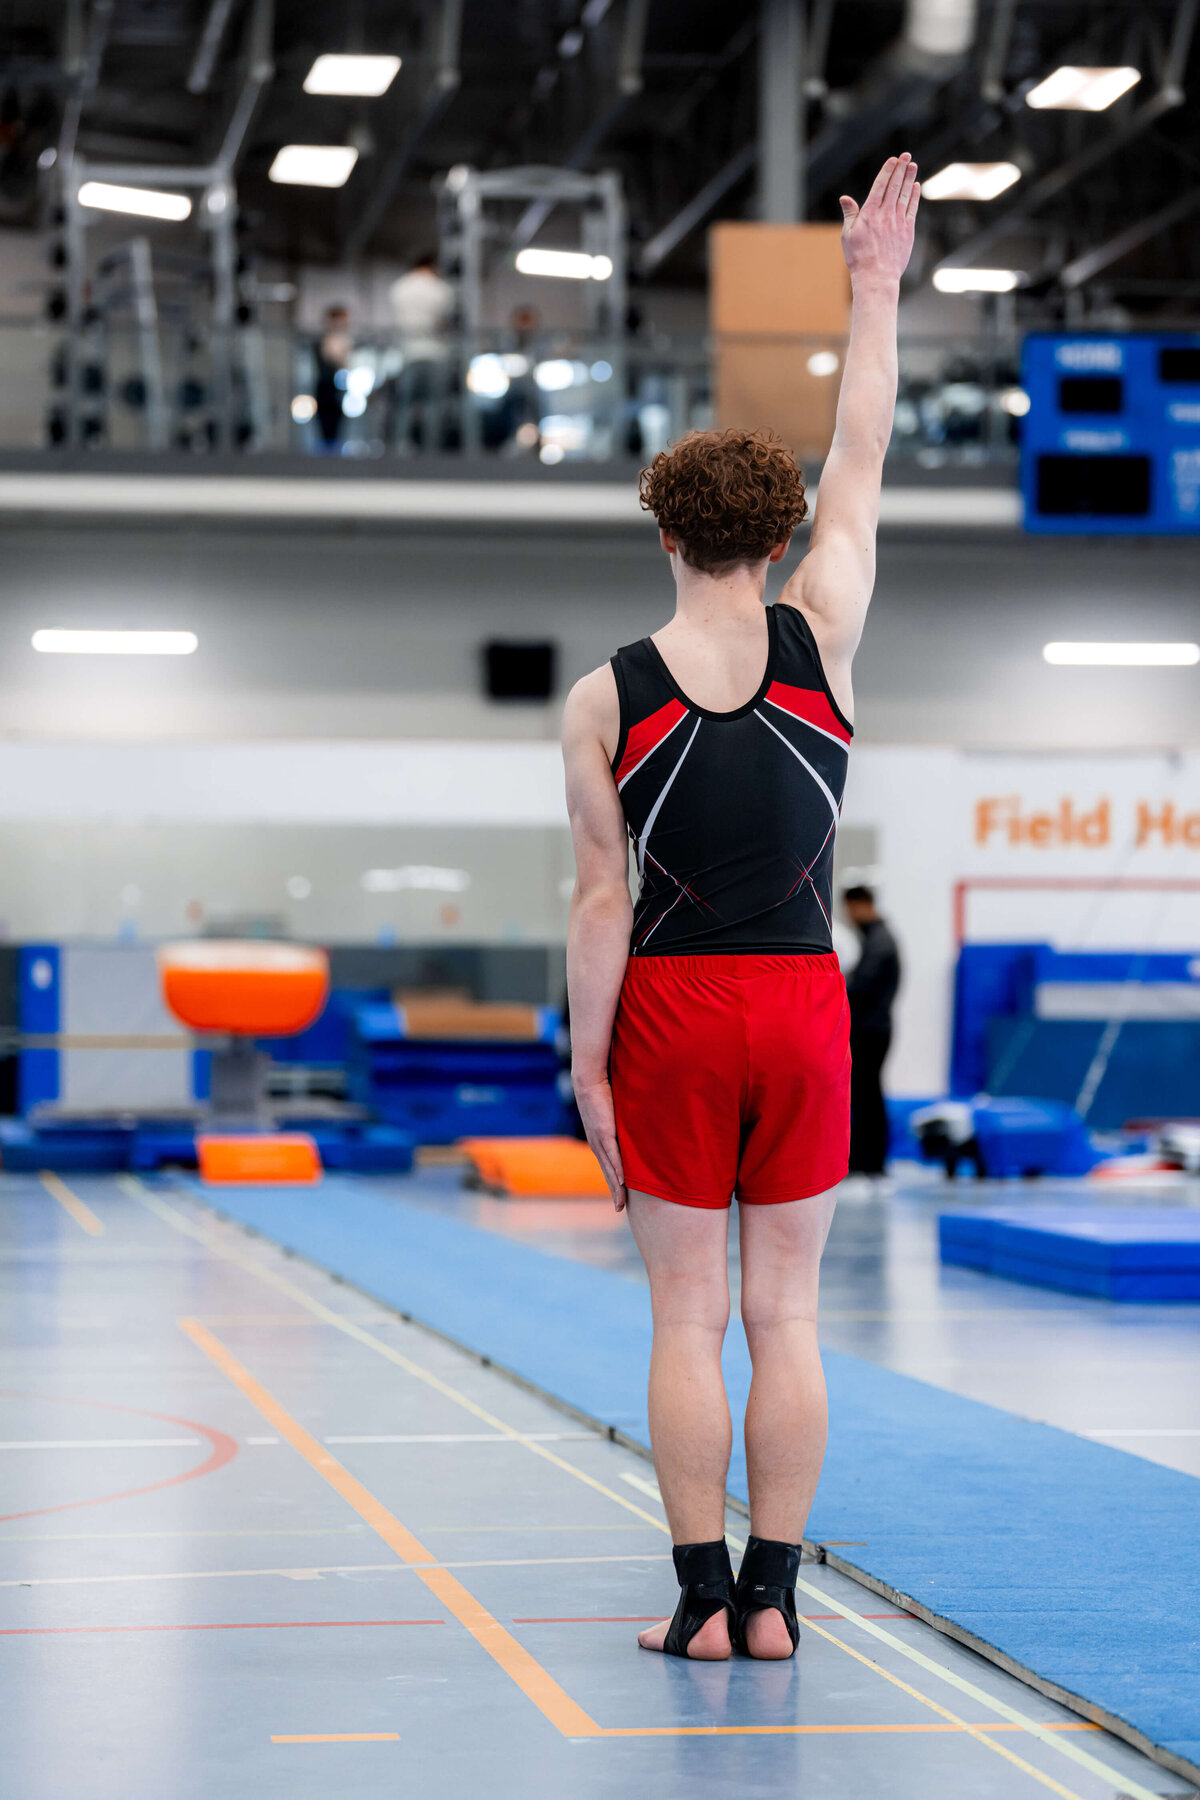 Photo by Luke O'Geil taken at the 2023 inaugural Grizzly Classic men's artistic gymnastics competitionA1_02729